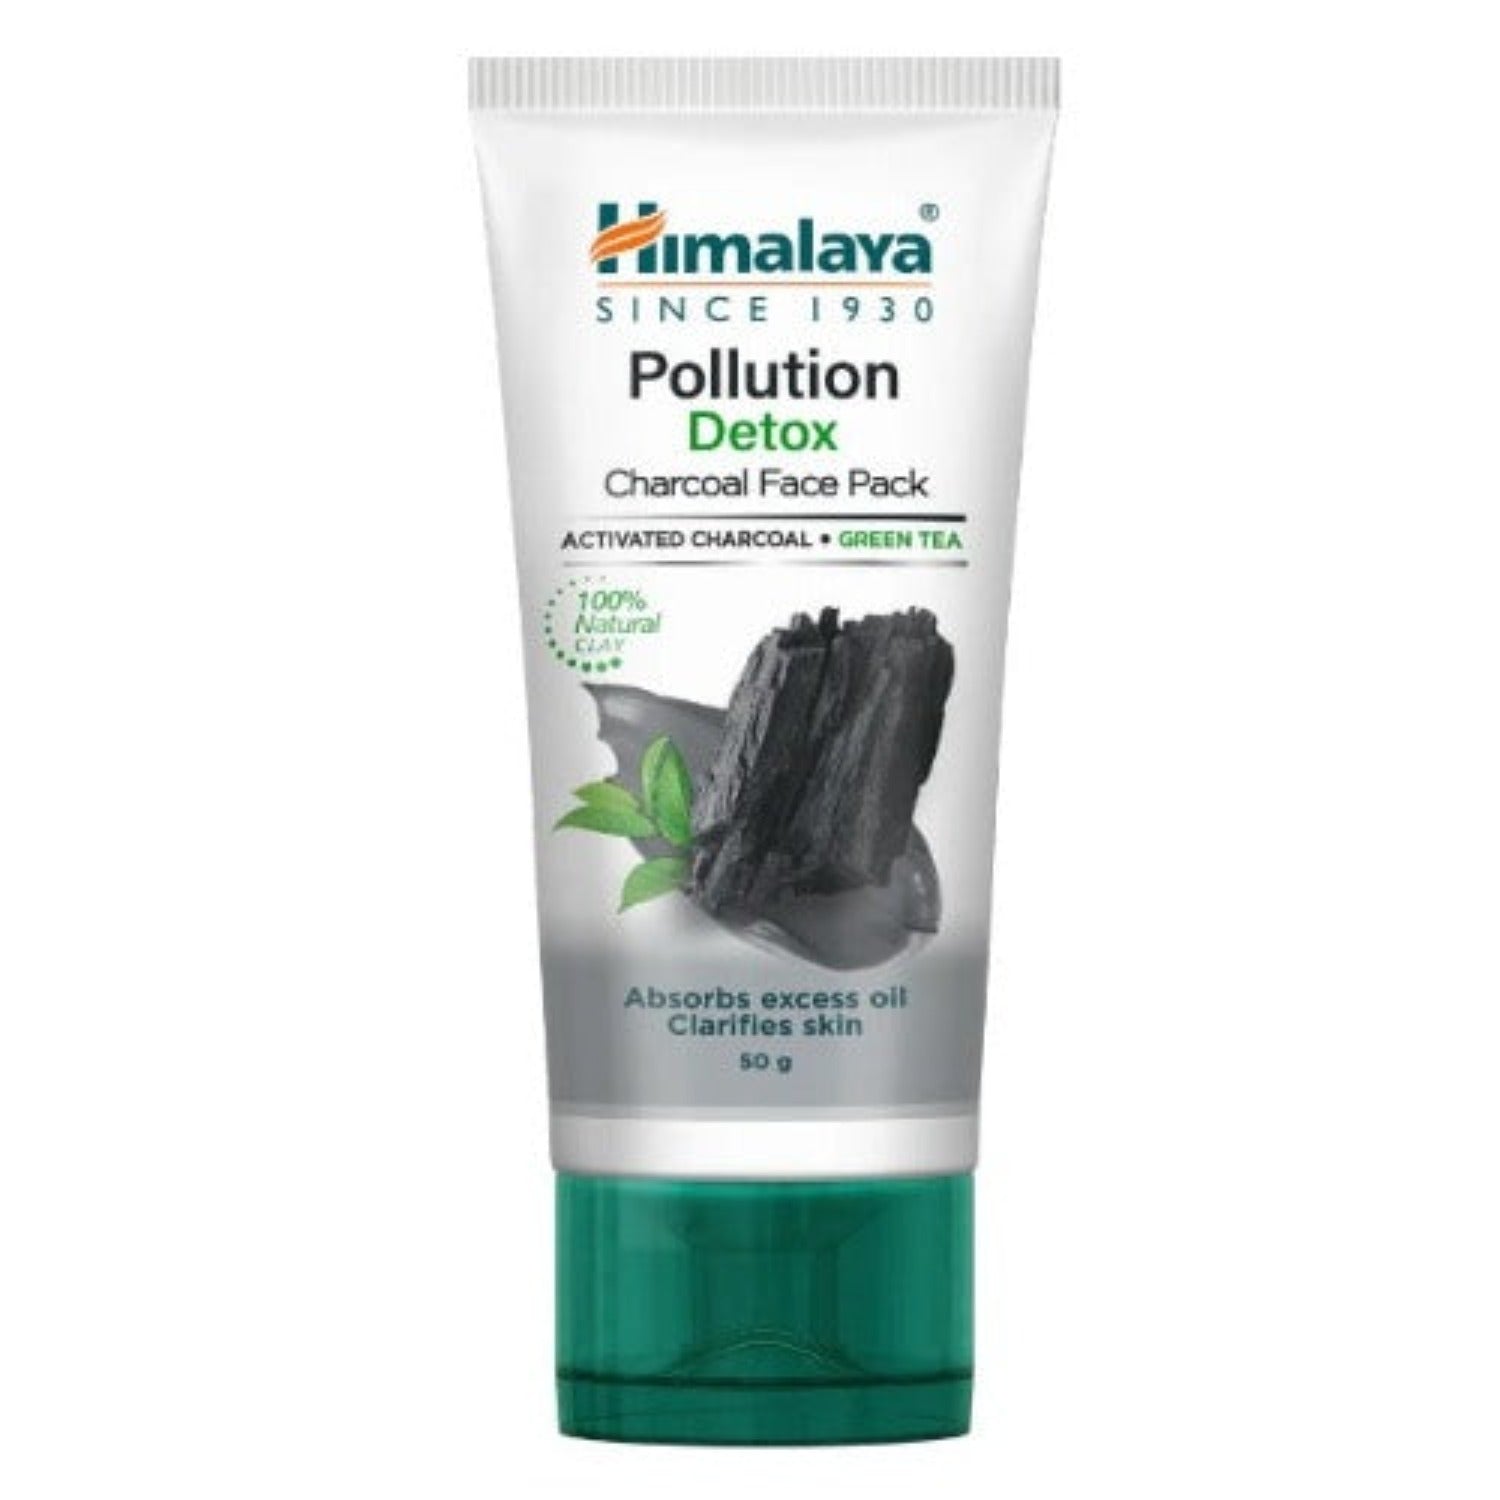 Himalaya Herbal Ayurvedic Personal Care Pollution Detox Charcoal Absorbs Excess Oil Clarifies Skin Face Pack